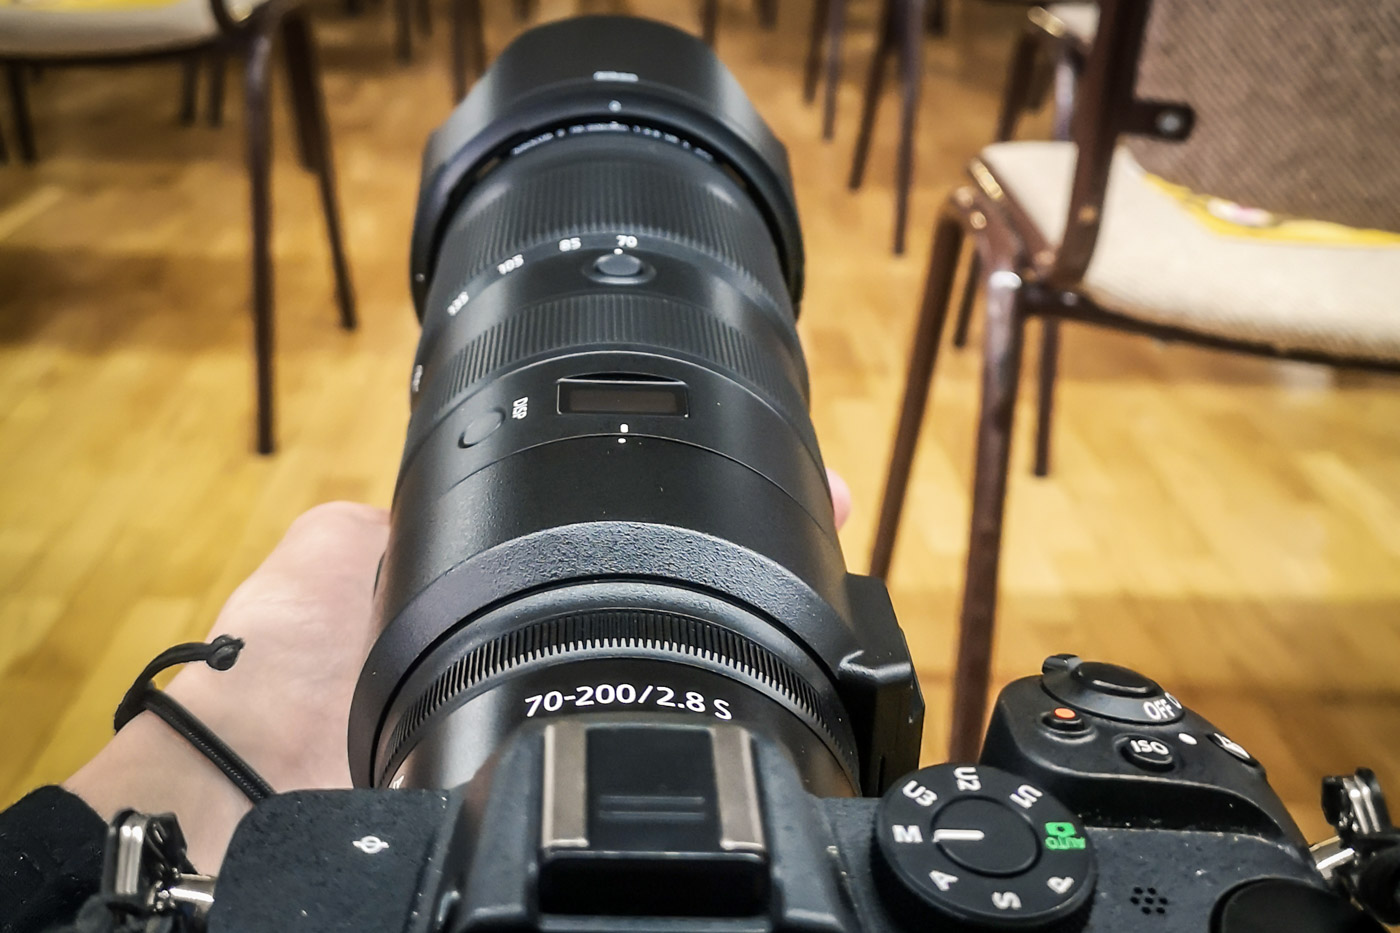 Rent a lense for weekend concert photography